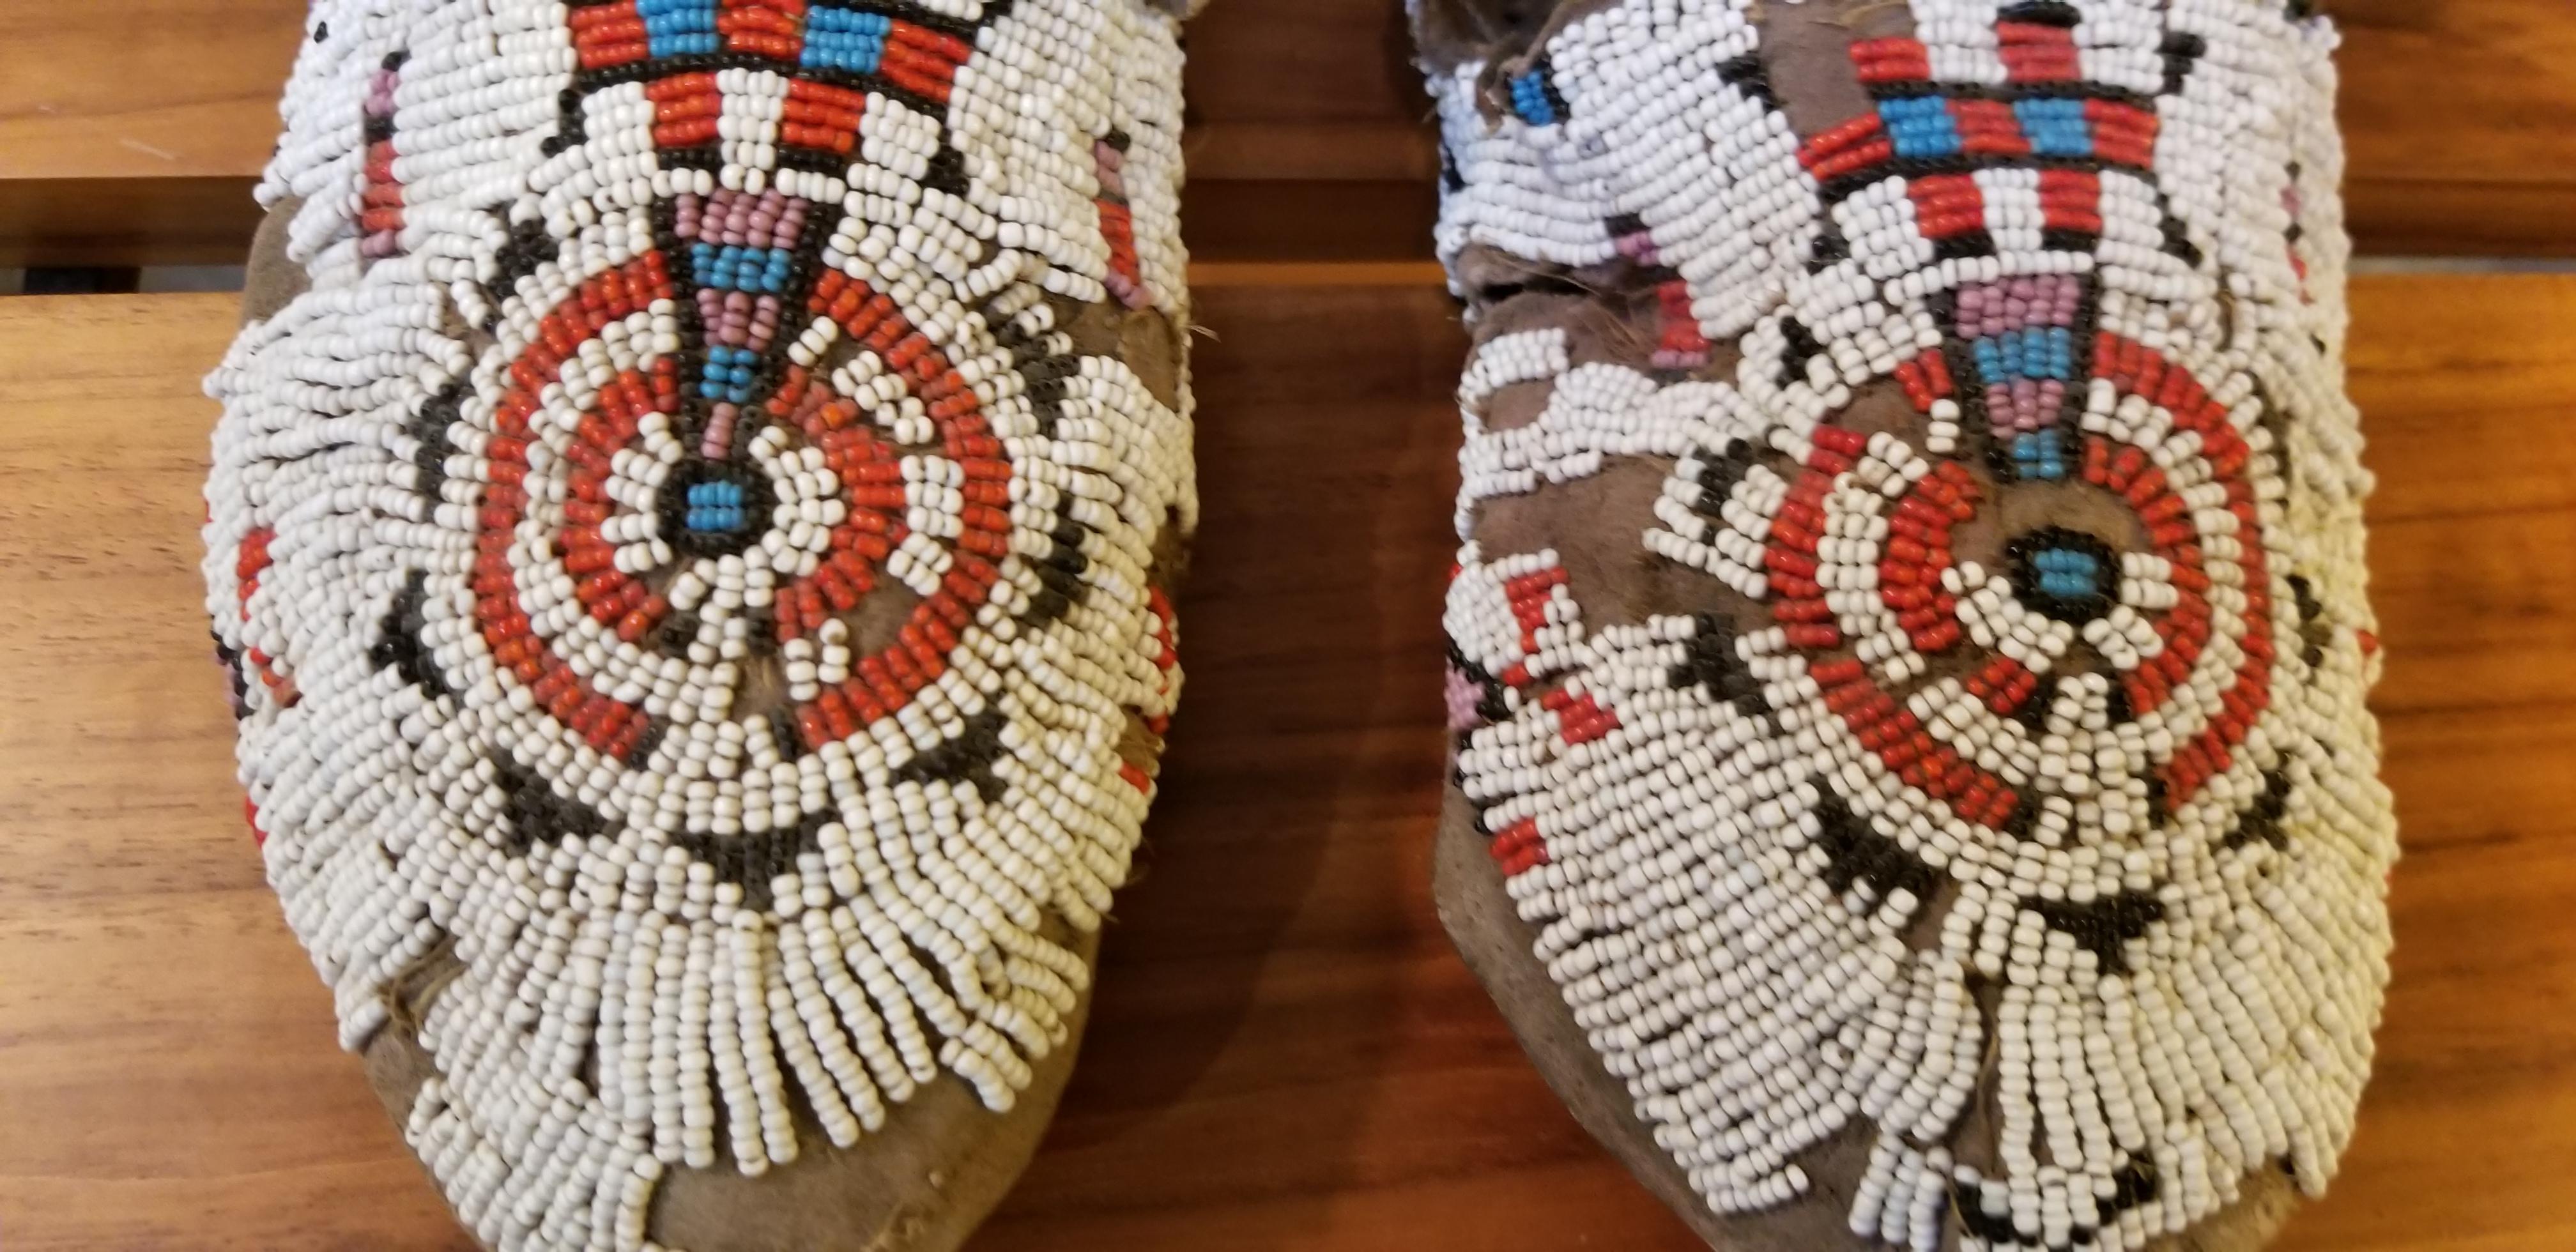 Authentic, antique beaded pair of Native American Sioux moccasins. Wear to leather and loss of beads from use. Late 19th-early 20th century.